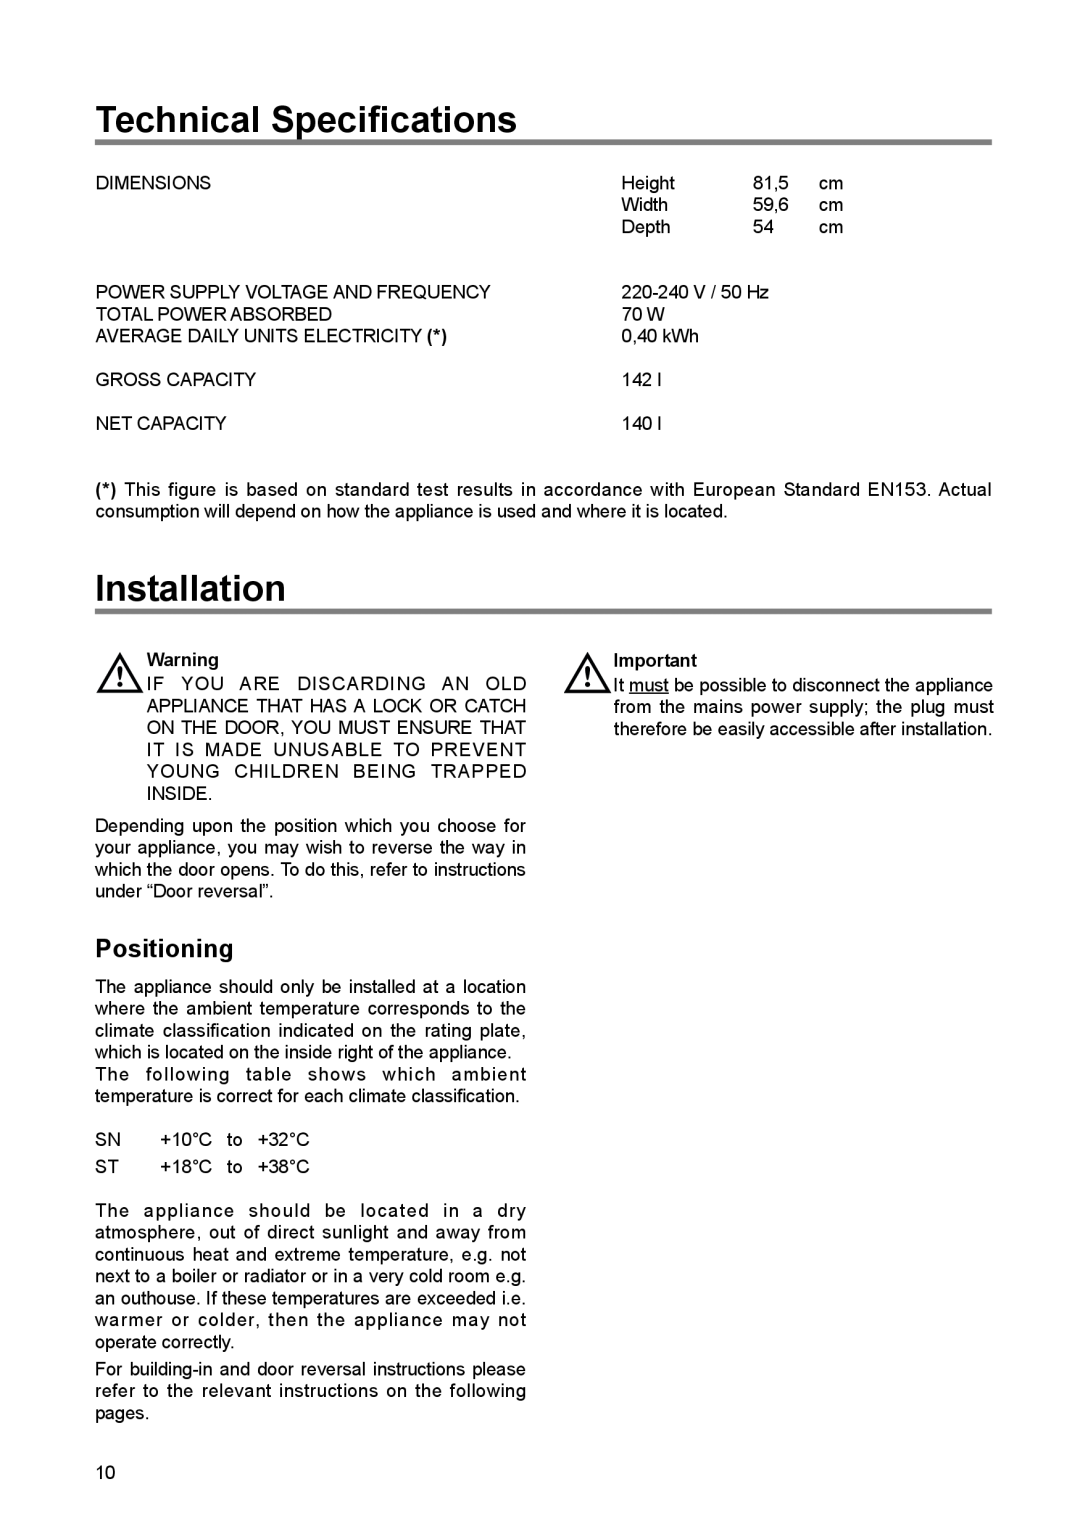 Tricity Bendix TBUL 140 installation instructions Technical Specifications, Installation, Positioning 